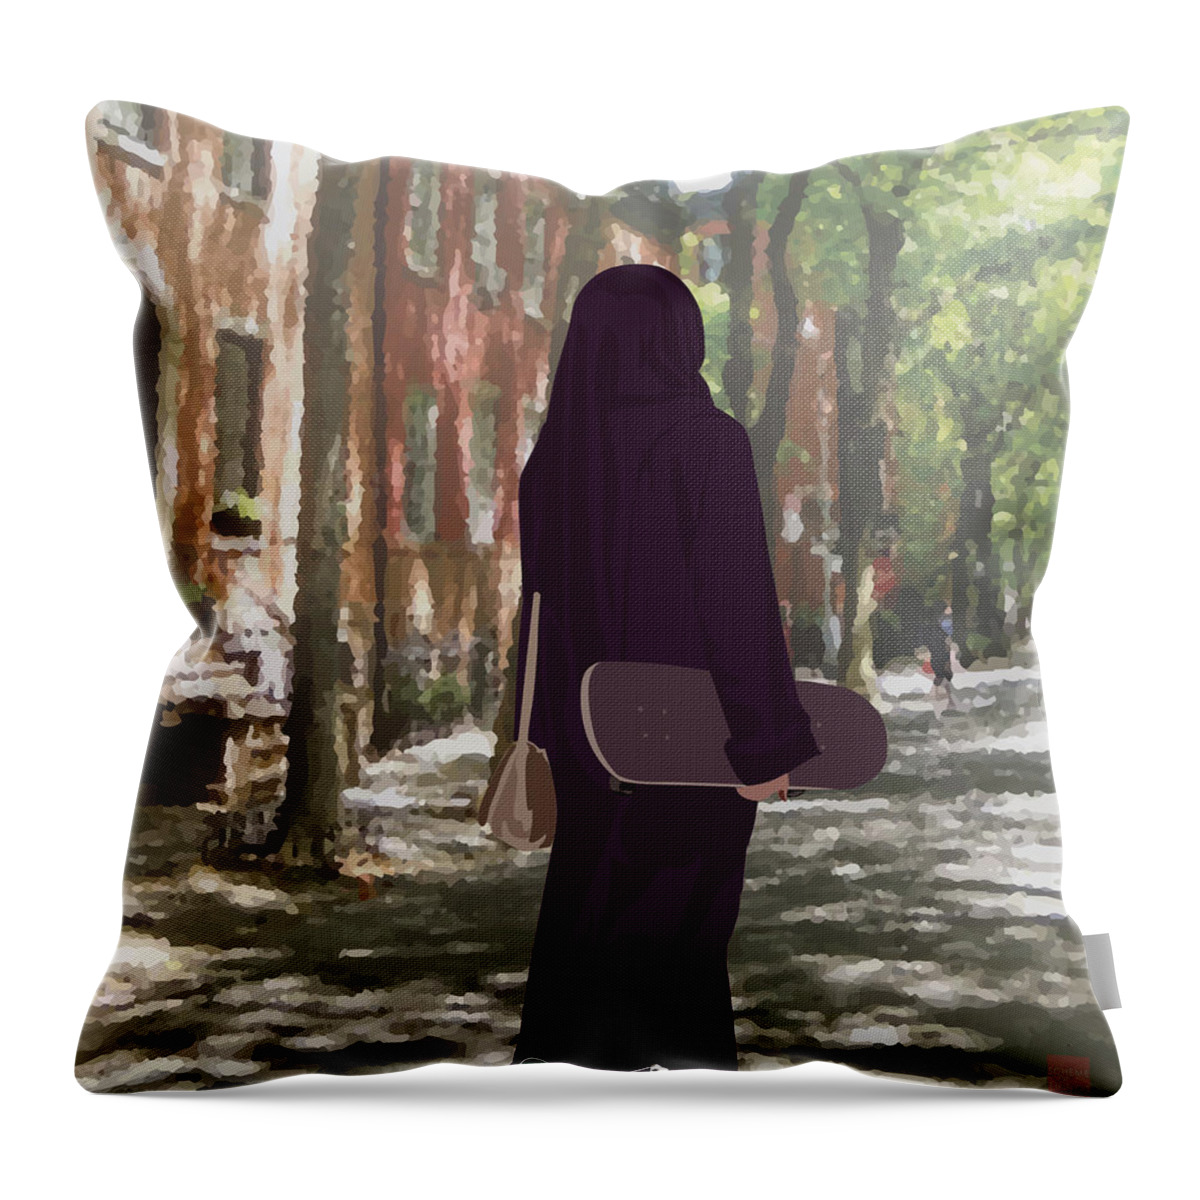 Skateboard Throw Pillow featuring the digital art Sk8r by Scheme Of Things Graphics